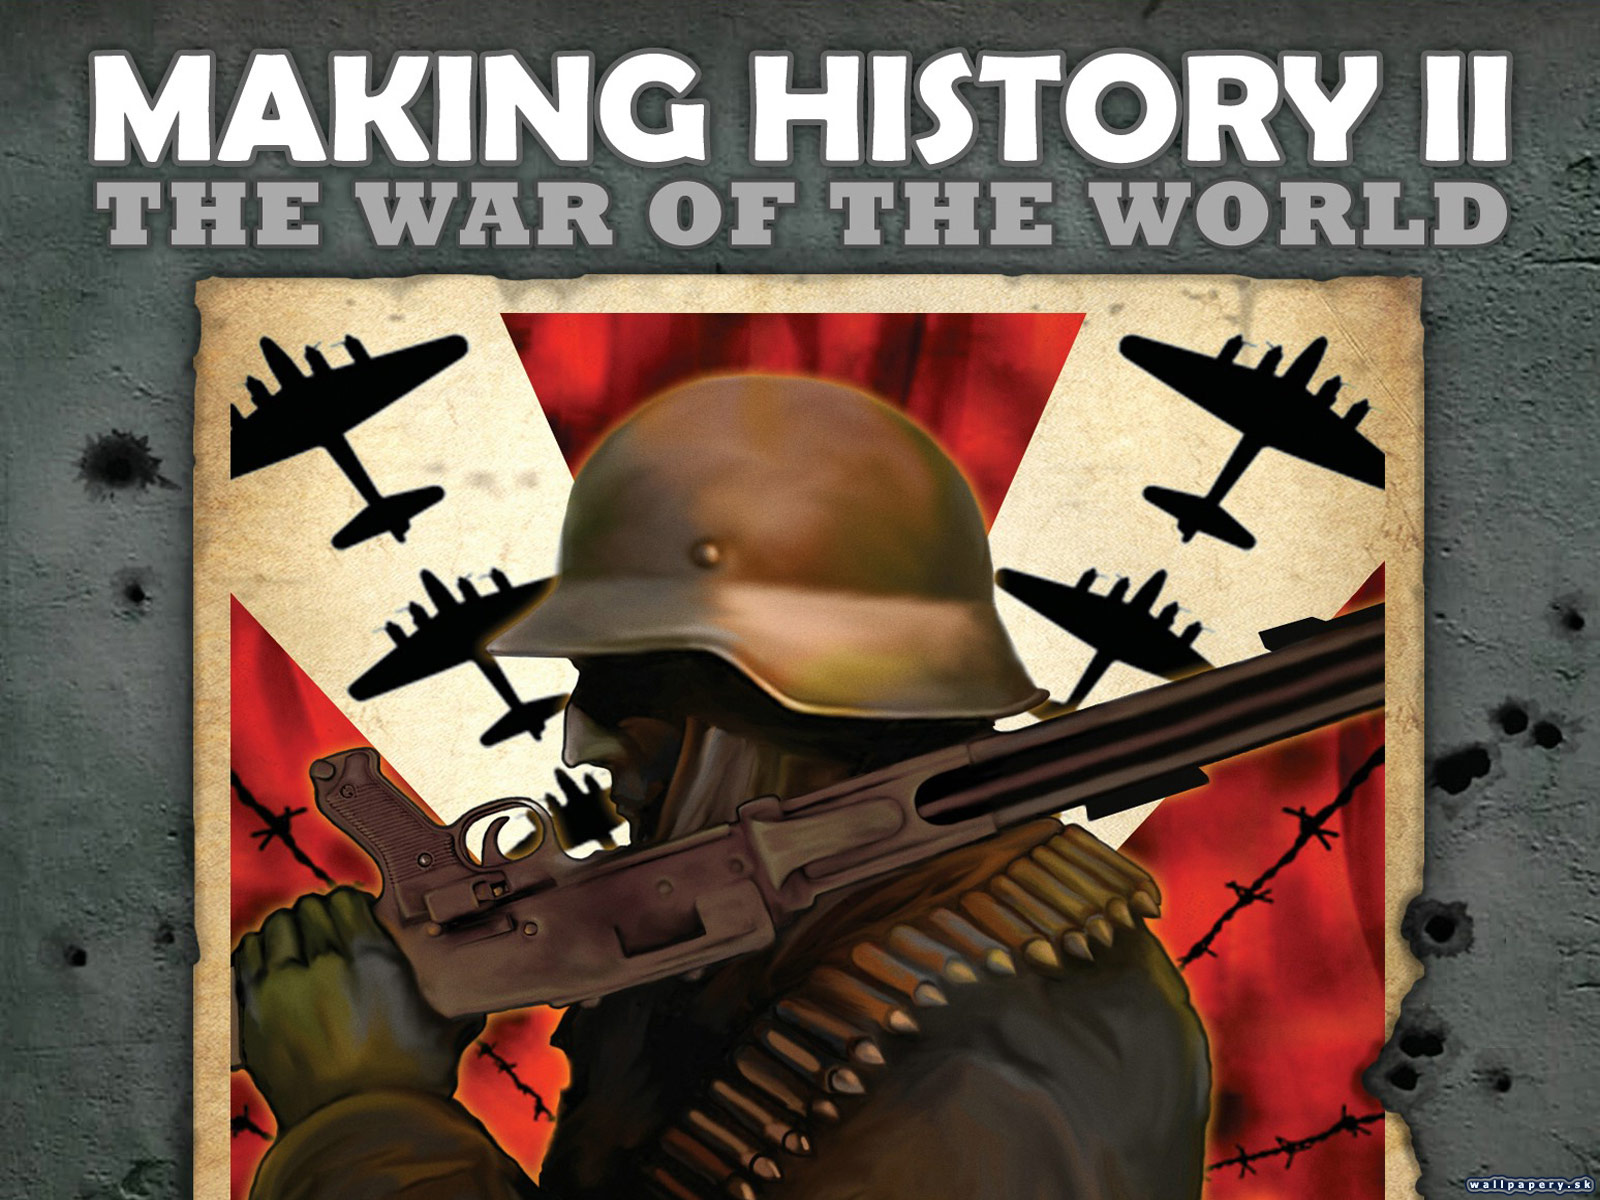 Making History II: The War of the World - wallpaper 2